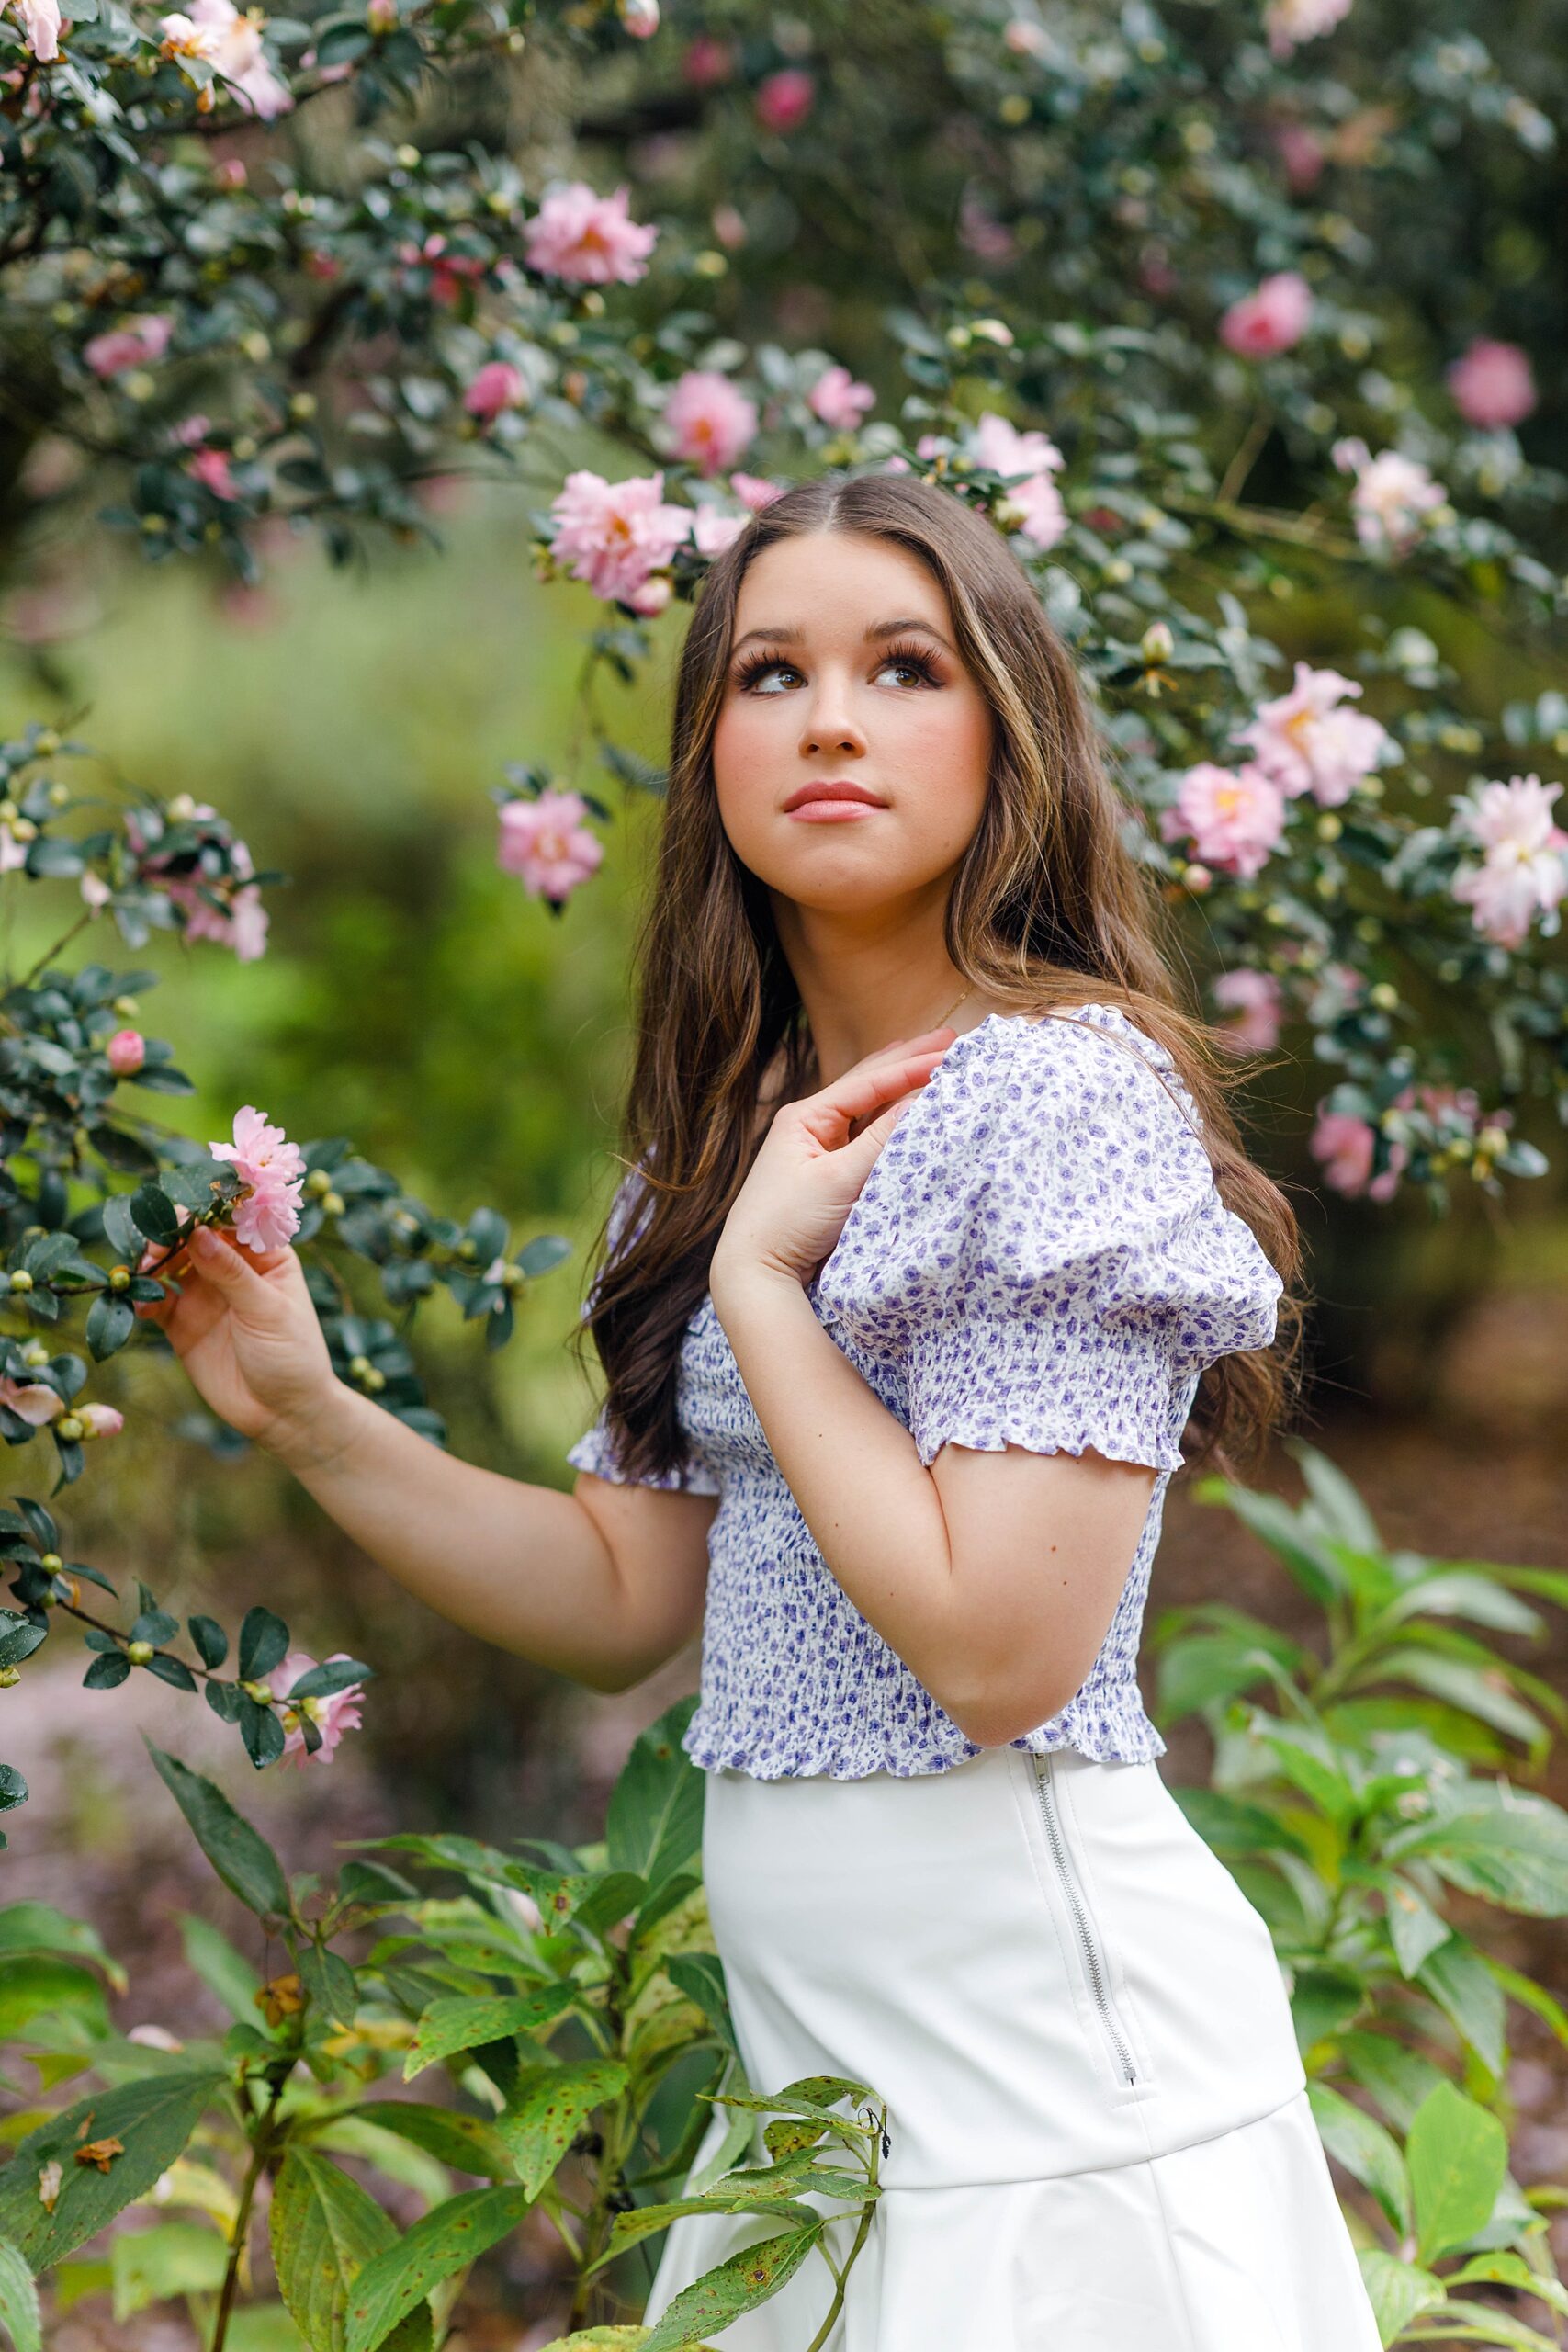 Preparing and expectations for your senior portrait session